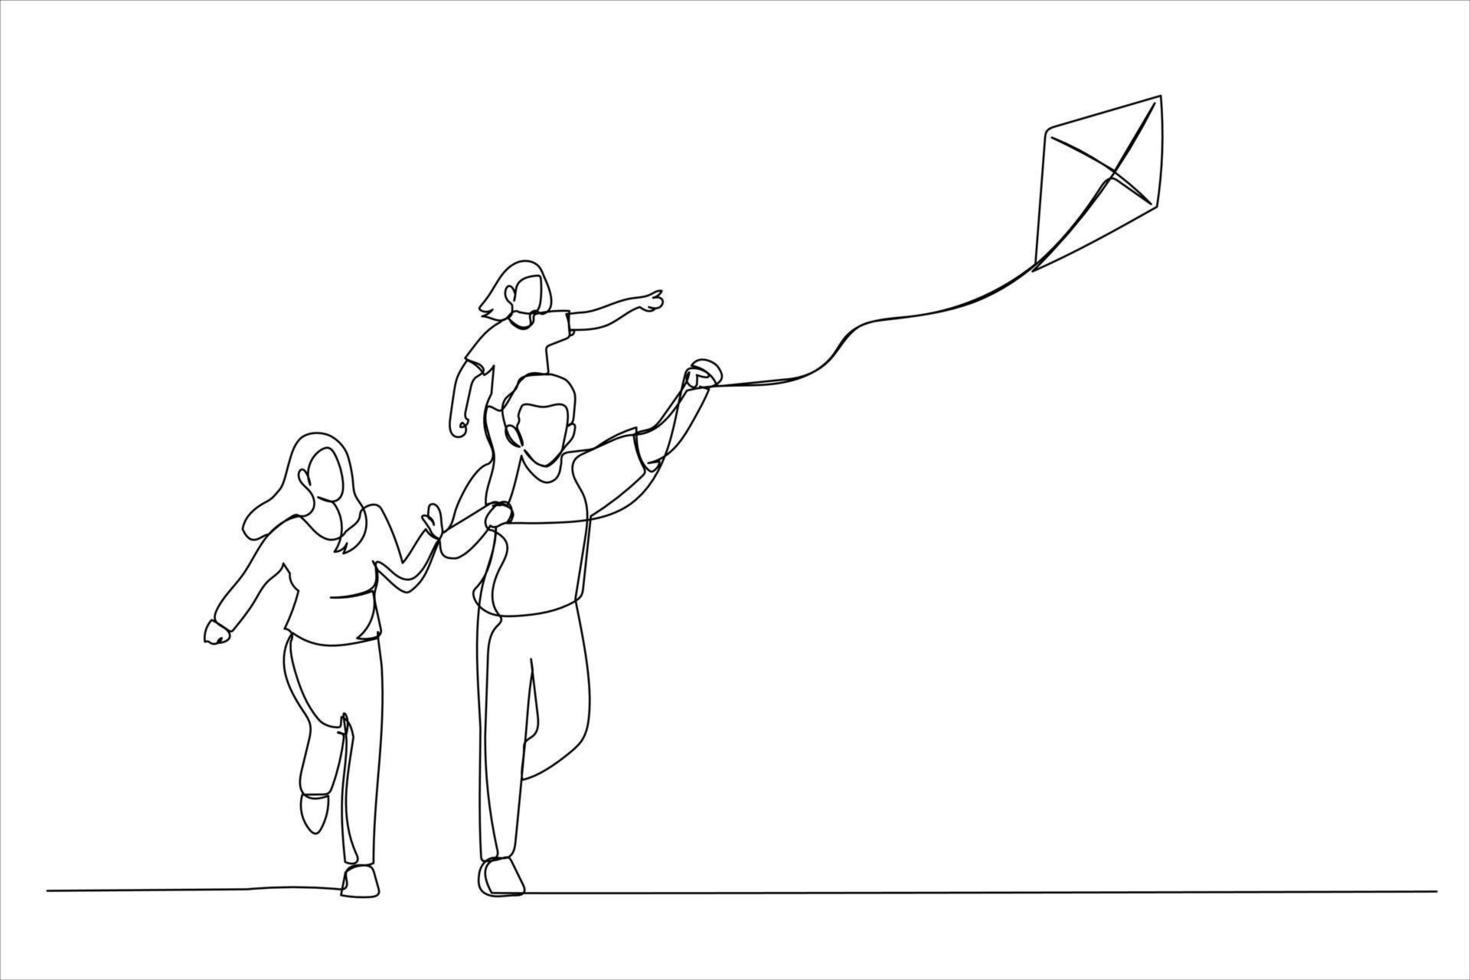 Cartoon of happy family father of mother and child daughter launch a kite on nature. Single continuous line art style vector